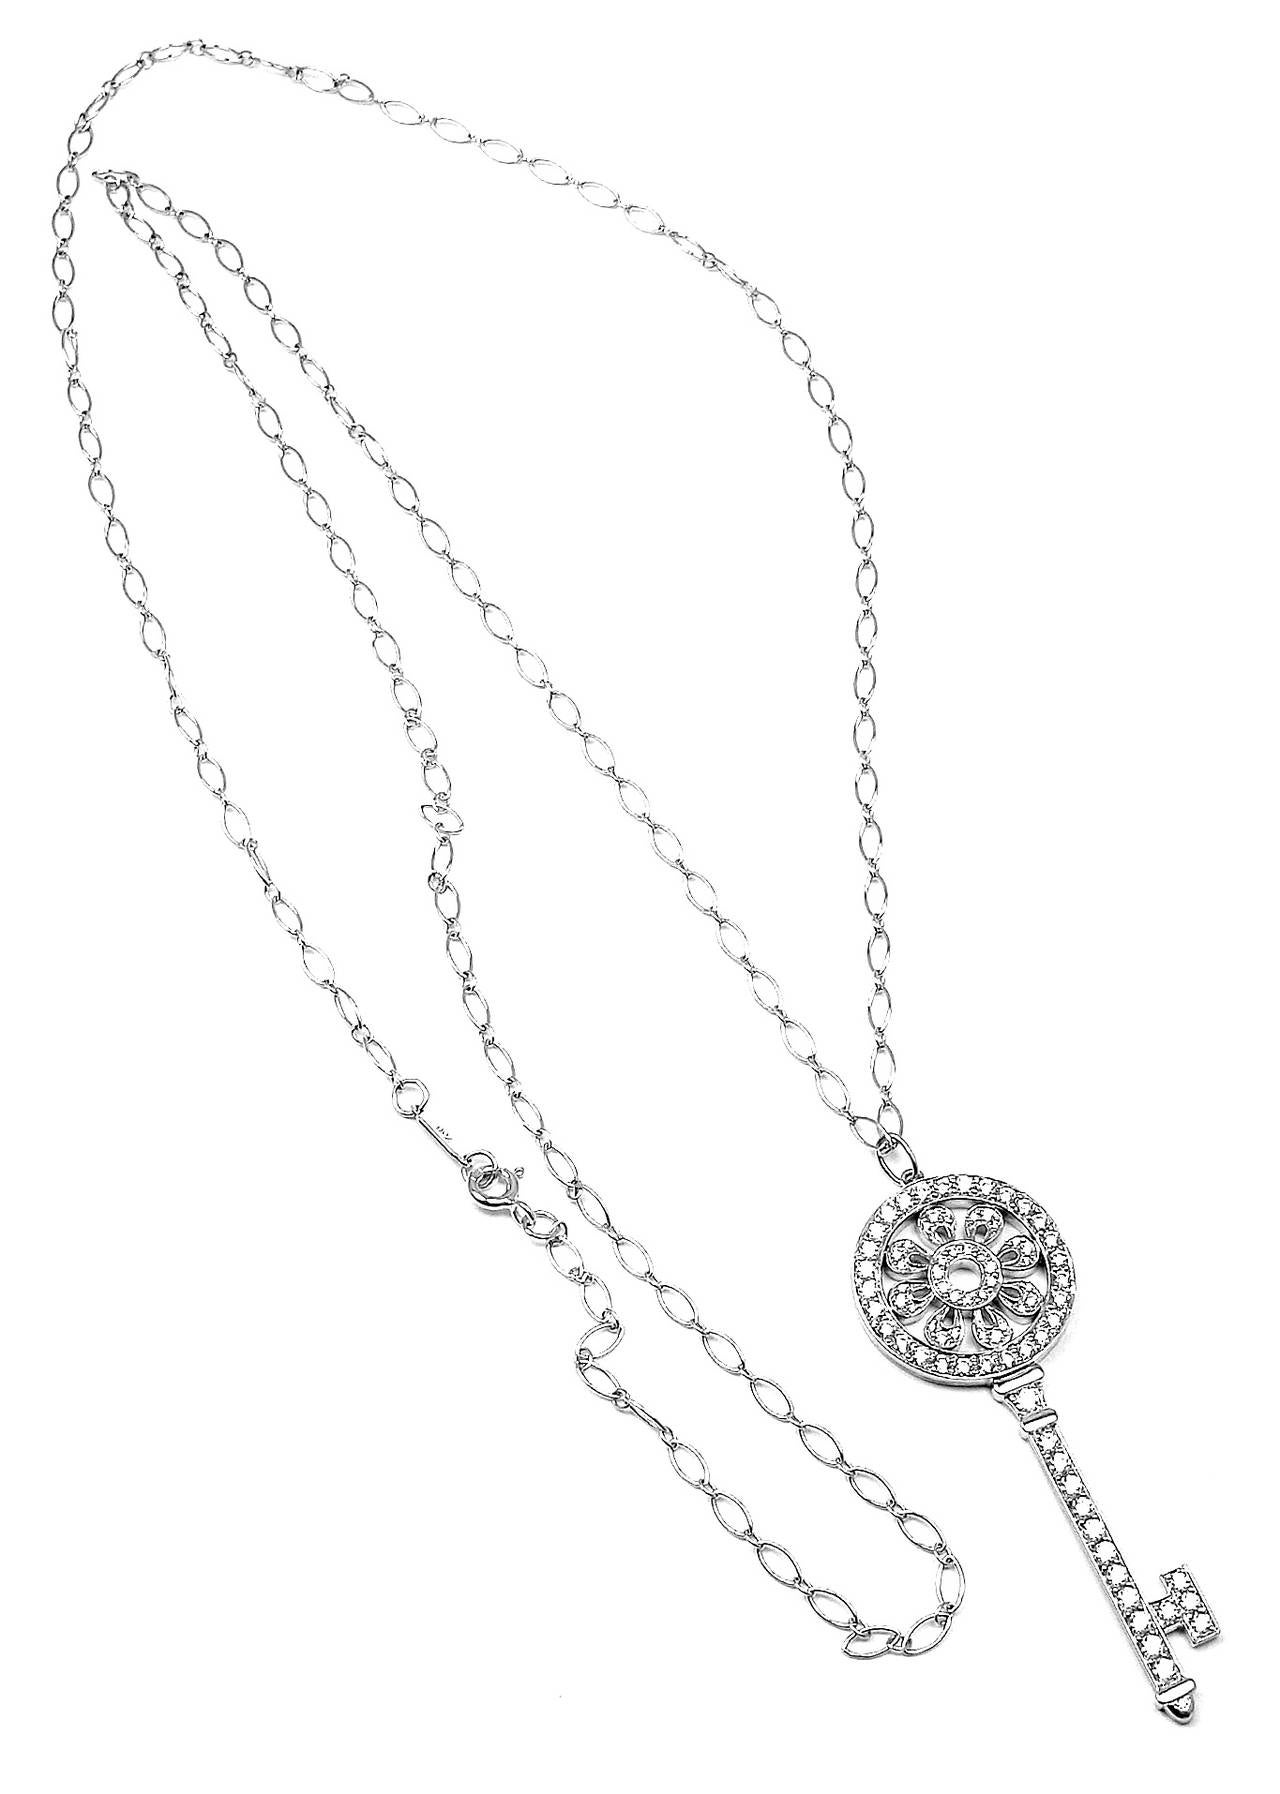 Platinum & 18k White Gold Diamond Petals Key Pendant Necklace by 
Tiffany & Co.
With 80 round brilliant cut diamonds VS1 clarity, G color total weight 
approx. 1.09ct

Details:
Weight: 14.4 grams
Length: 30